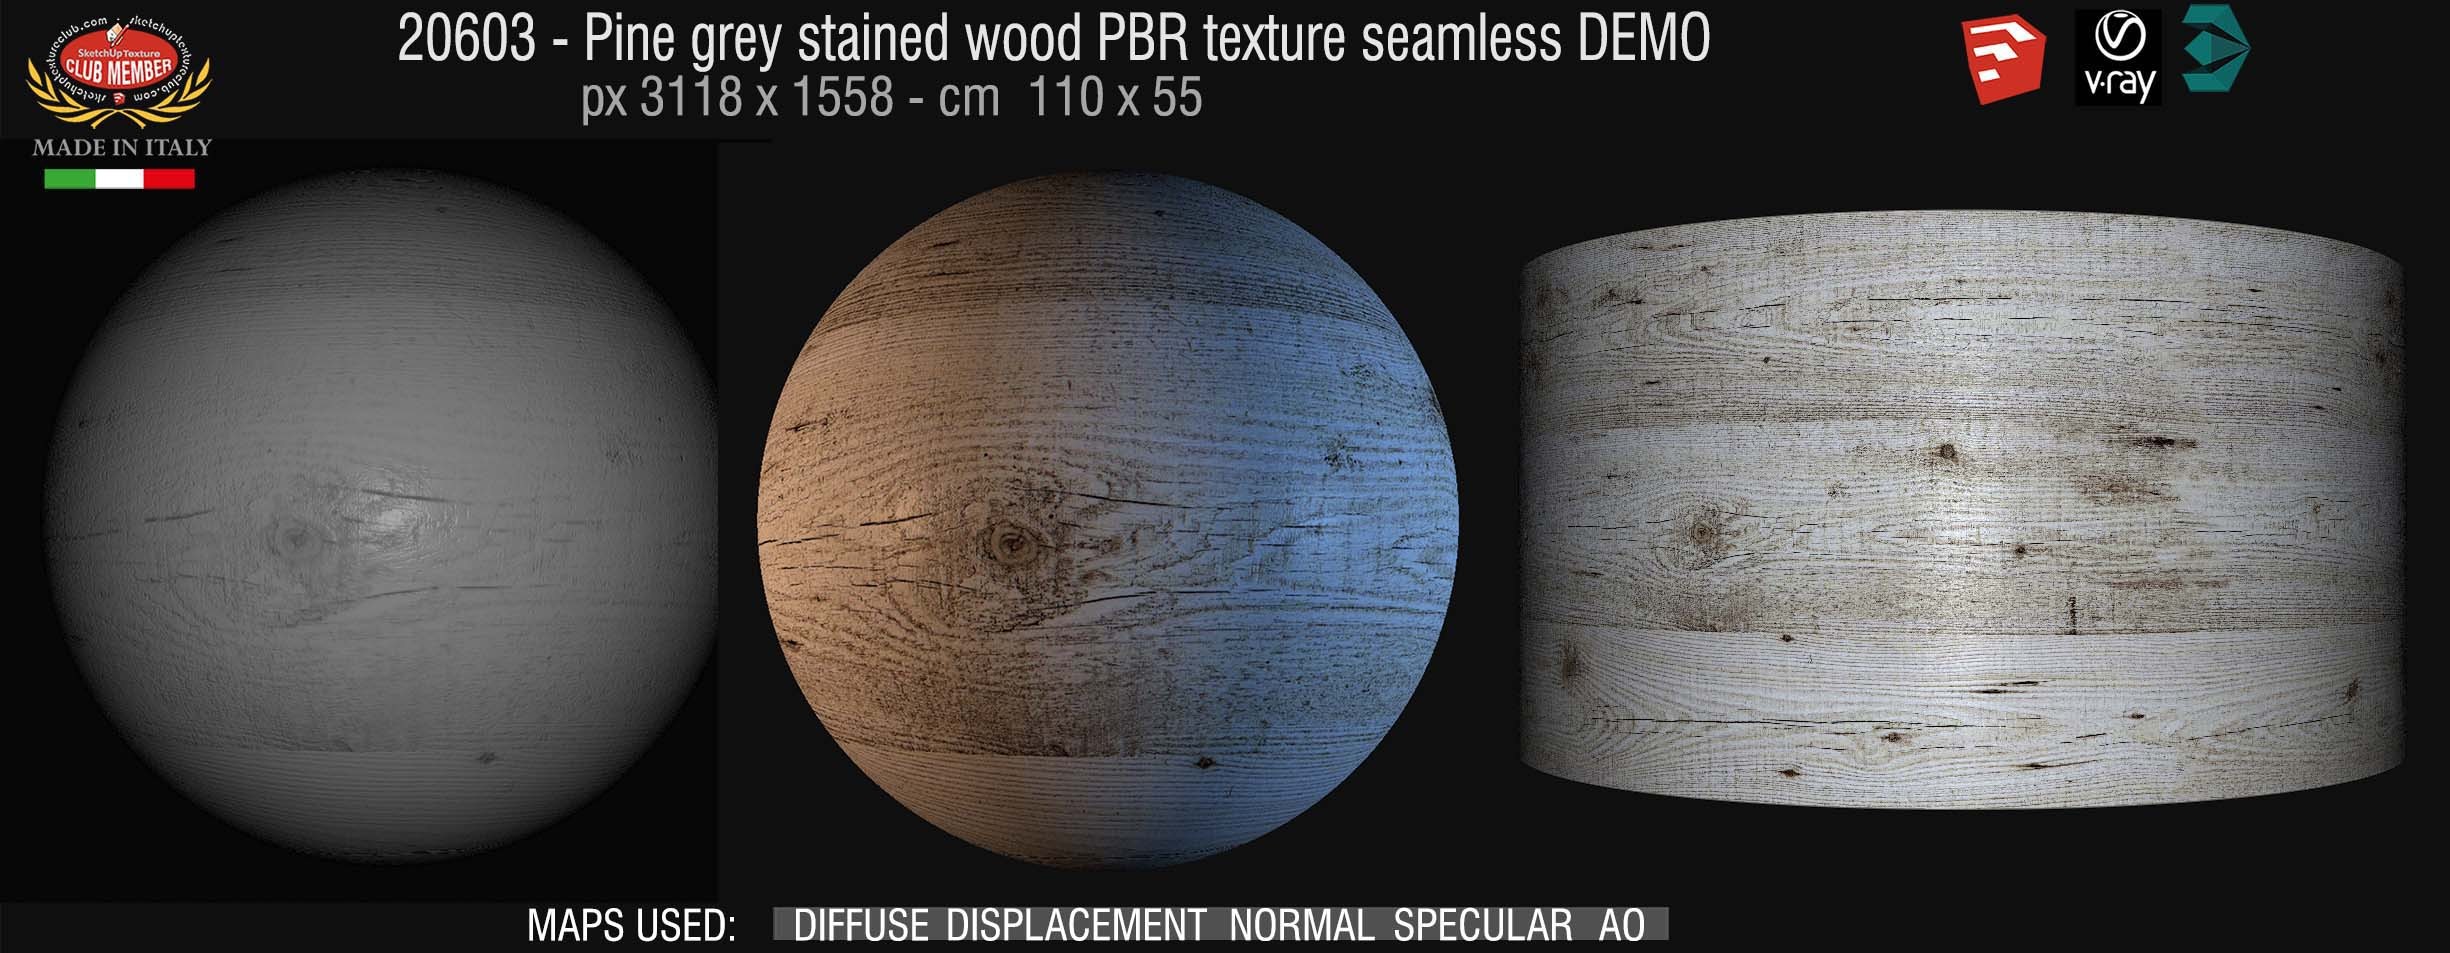 20603 Pine grey stained wood PBR texture seamless DEMO